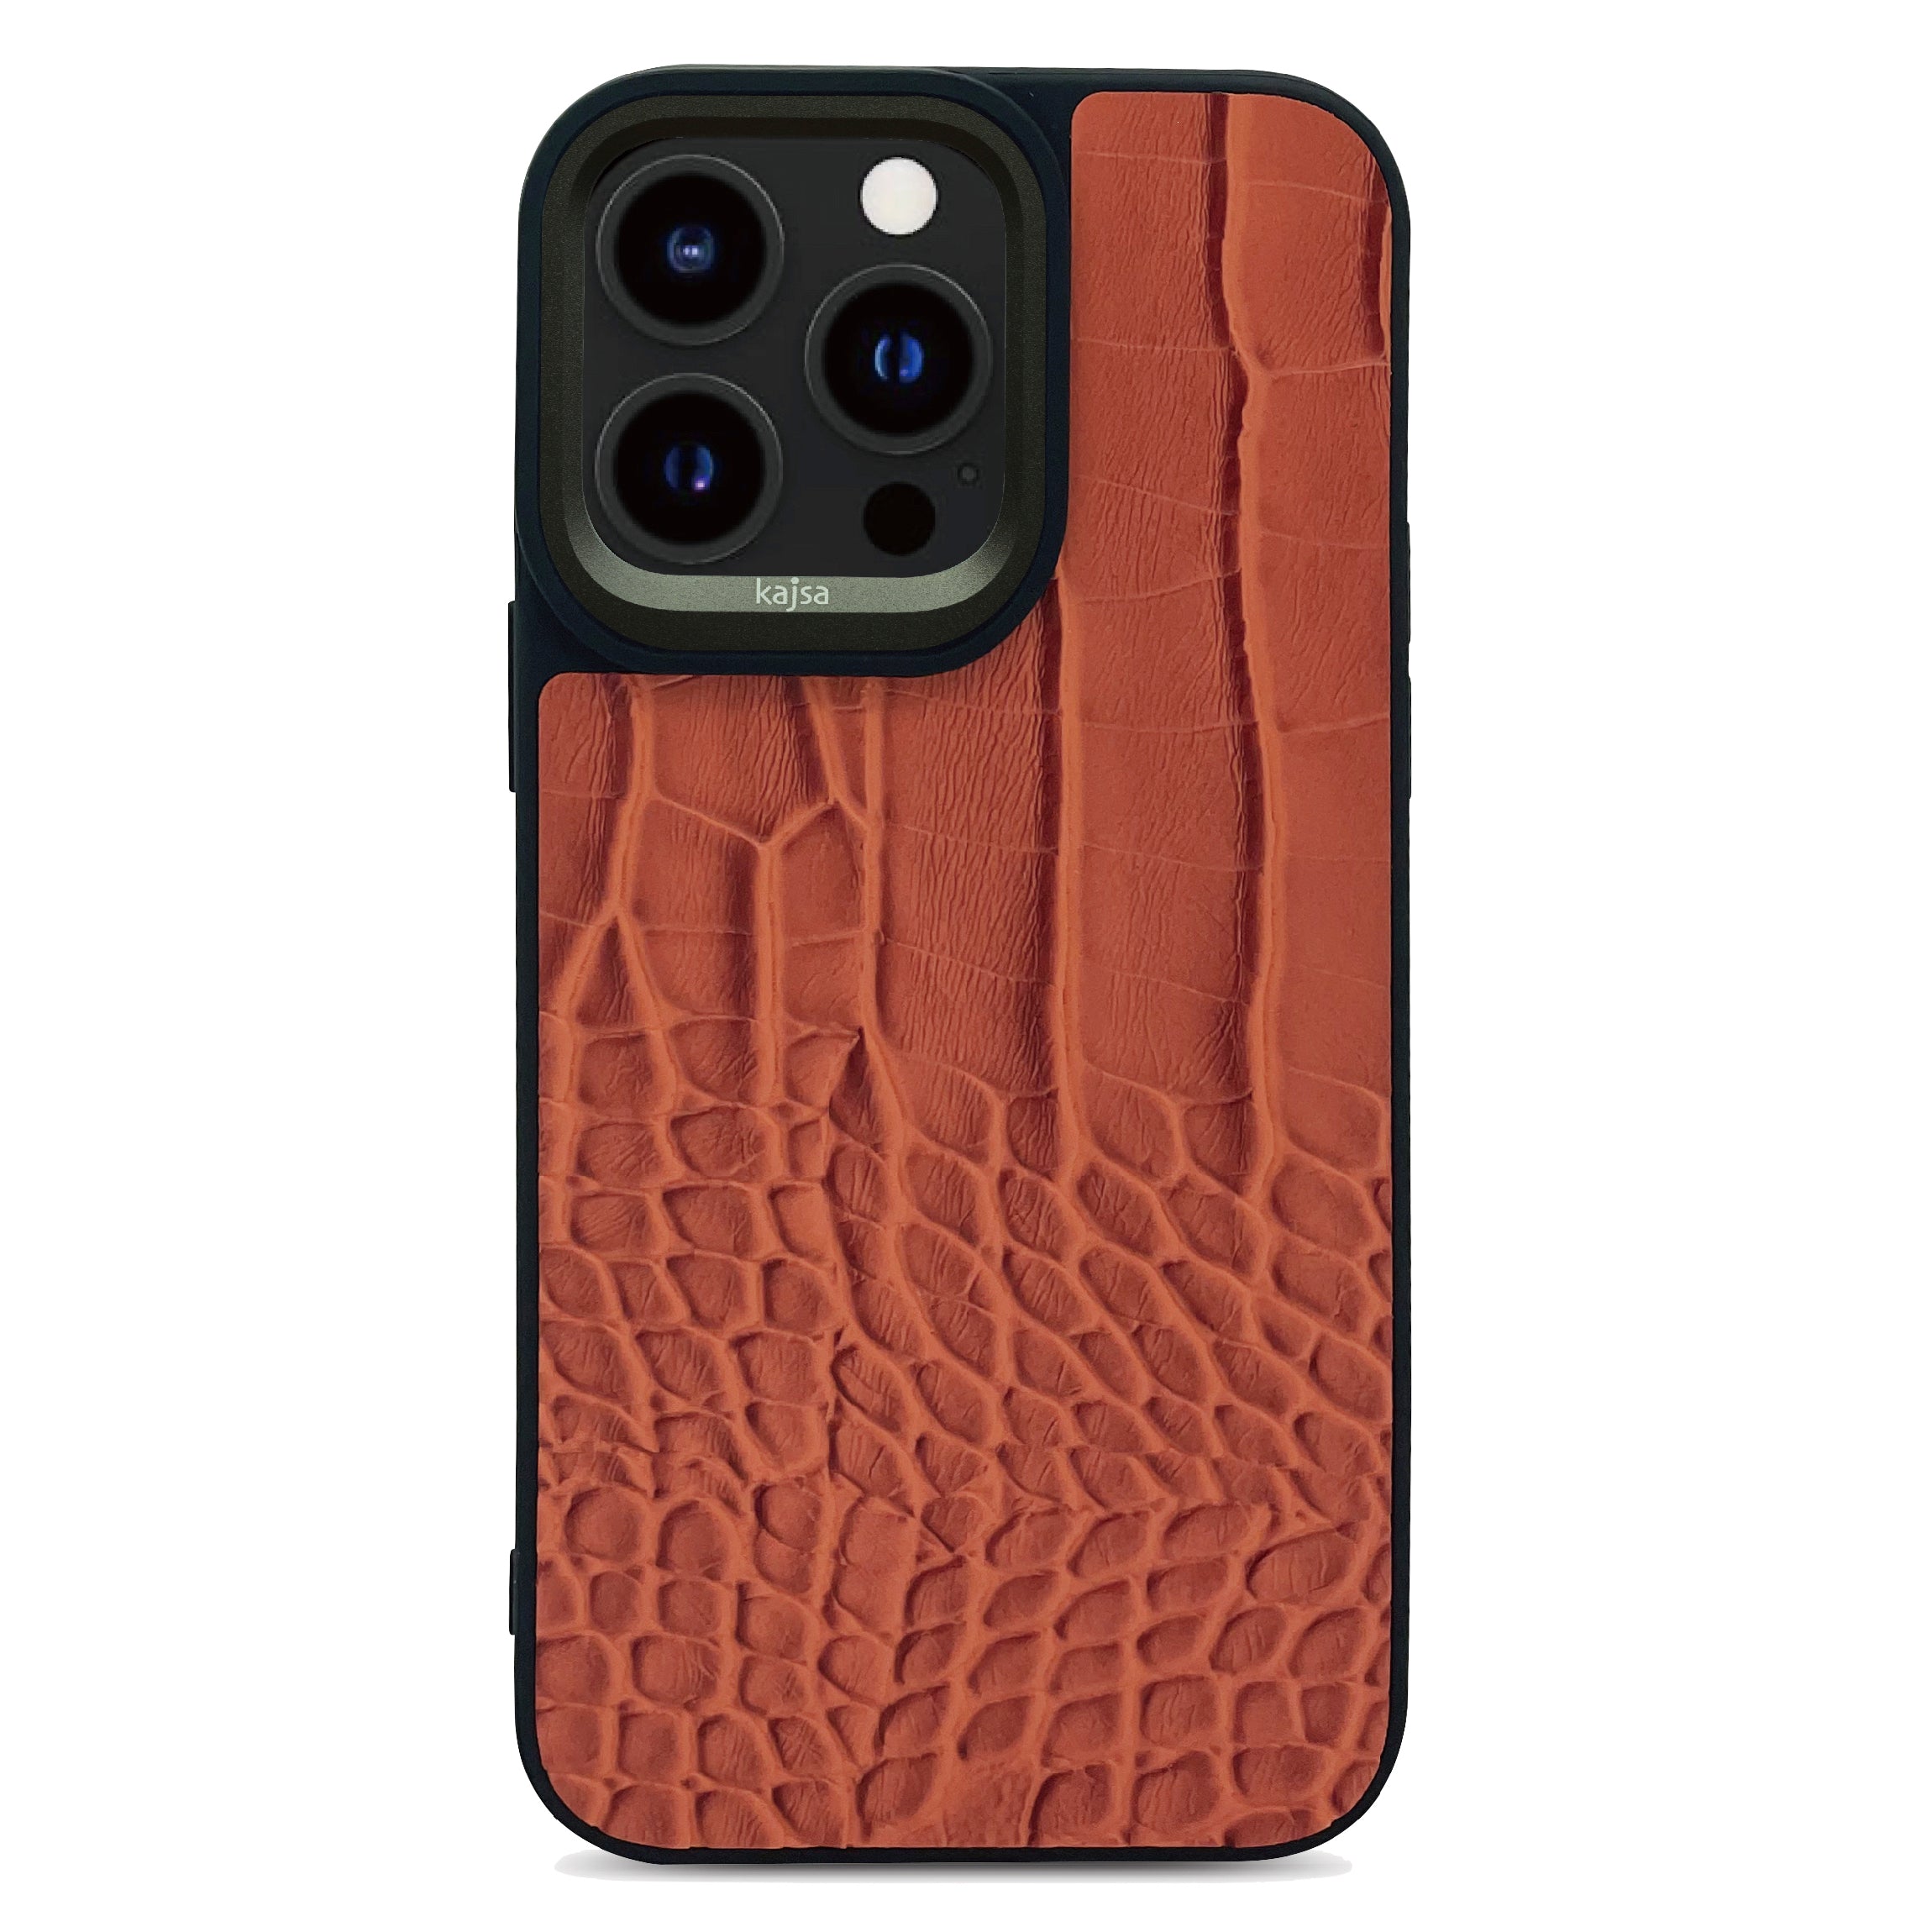 Glamorous Collection - Bright Croco Back Case for iPhone 14-Phone Case- phone case - phone cases- phone cover- iphone cover- iphone case- iphone cases- leather case- leather cases- DIYCASE - custom case - leather cover - hand strap case - croco pattern case - snake pattern case - carbon fiber phone case - phone case brand - unique phone case - high quality - phone case brand - protective case - buy phone case hong kong - online buy phone case - iphone‎手機殼 - 客製化手機殼 - samsung ‎手機殼 - 香港手機殼 - 買電話殼